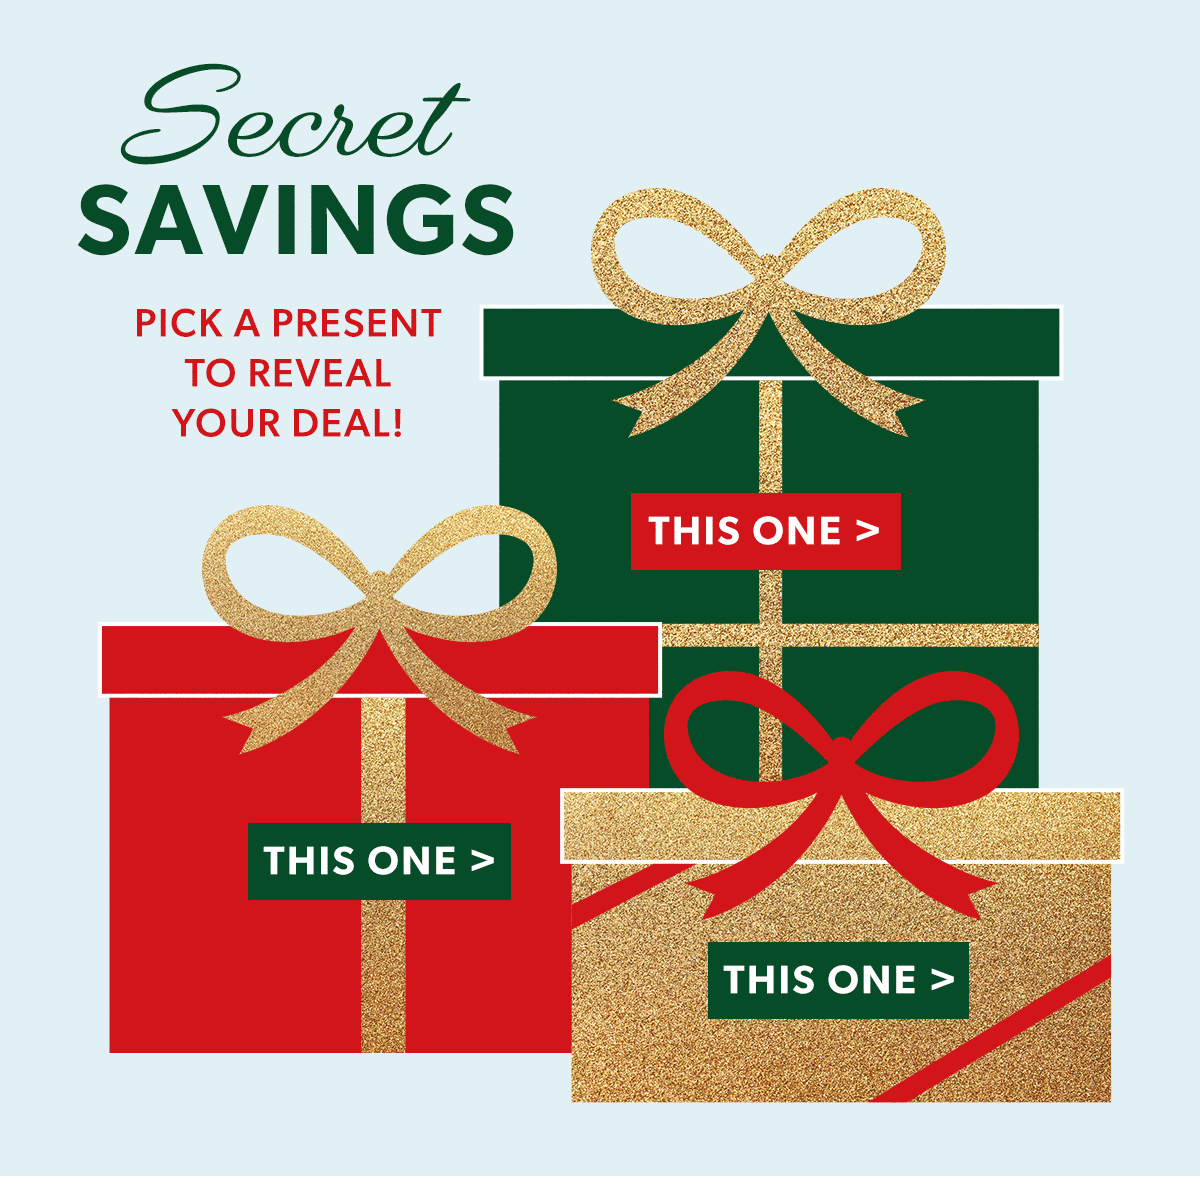 Secret Savings. Pick A Present To Reveal Your Deal!